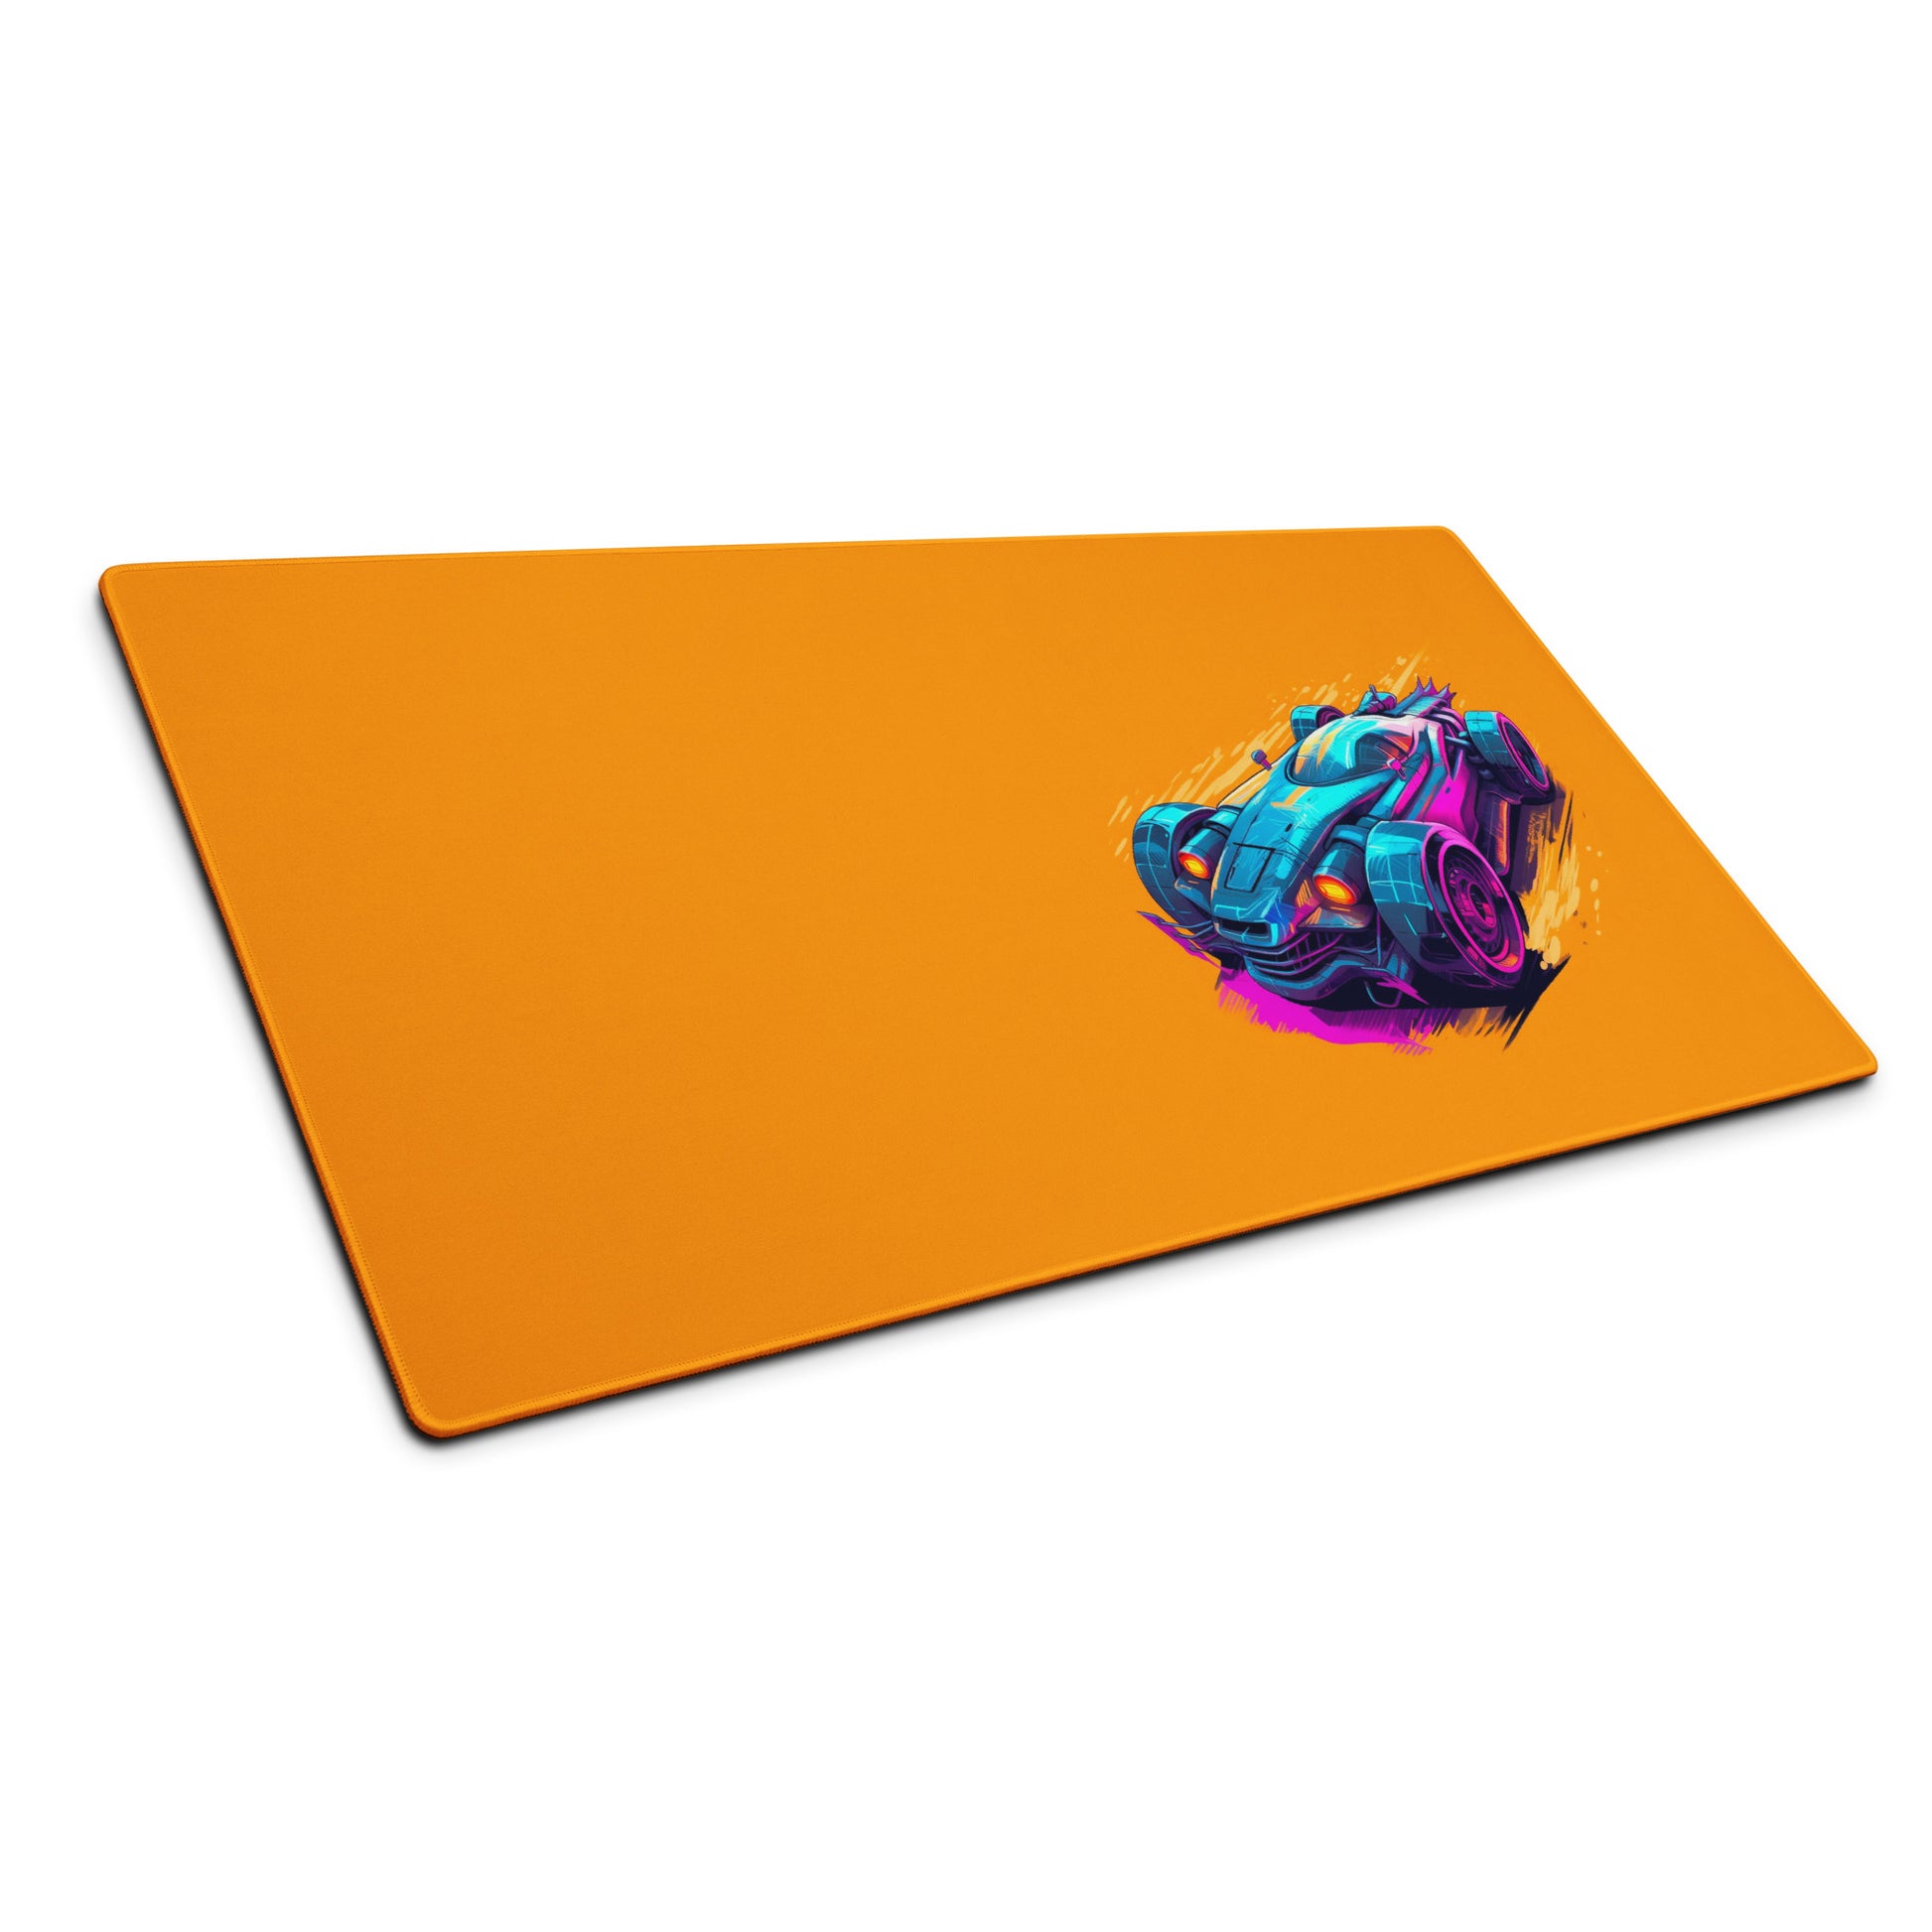 An angled view of a 36" x 18" desk pad with a futuristic race car pictured on the right. Orange in color.